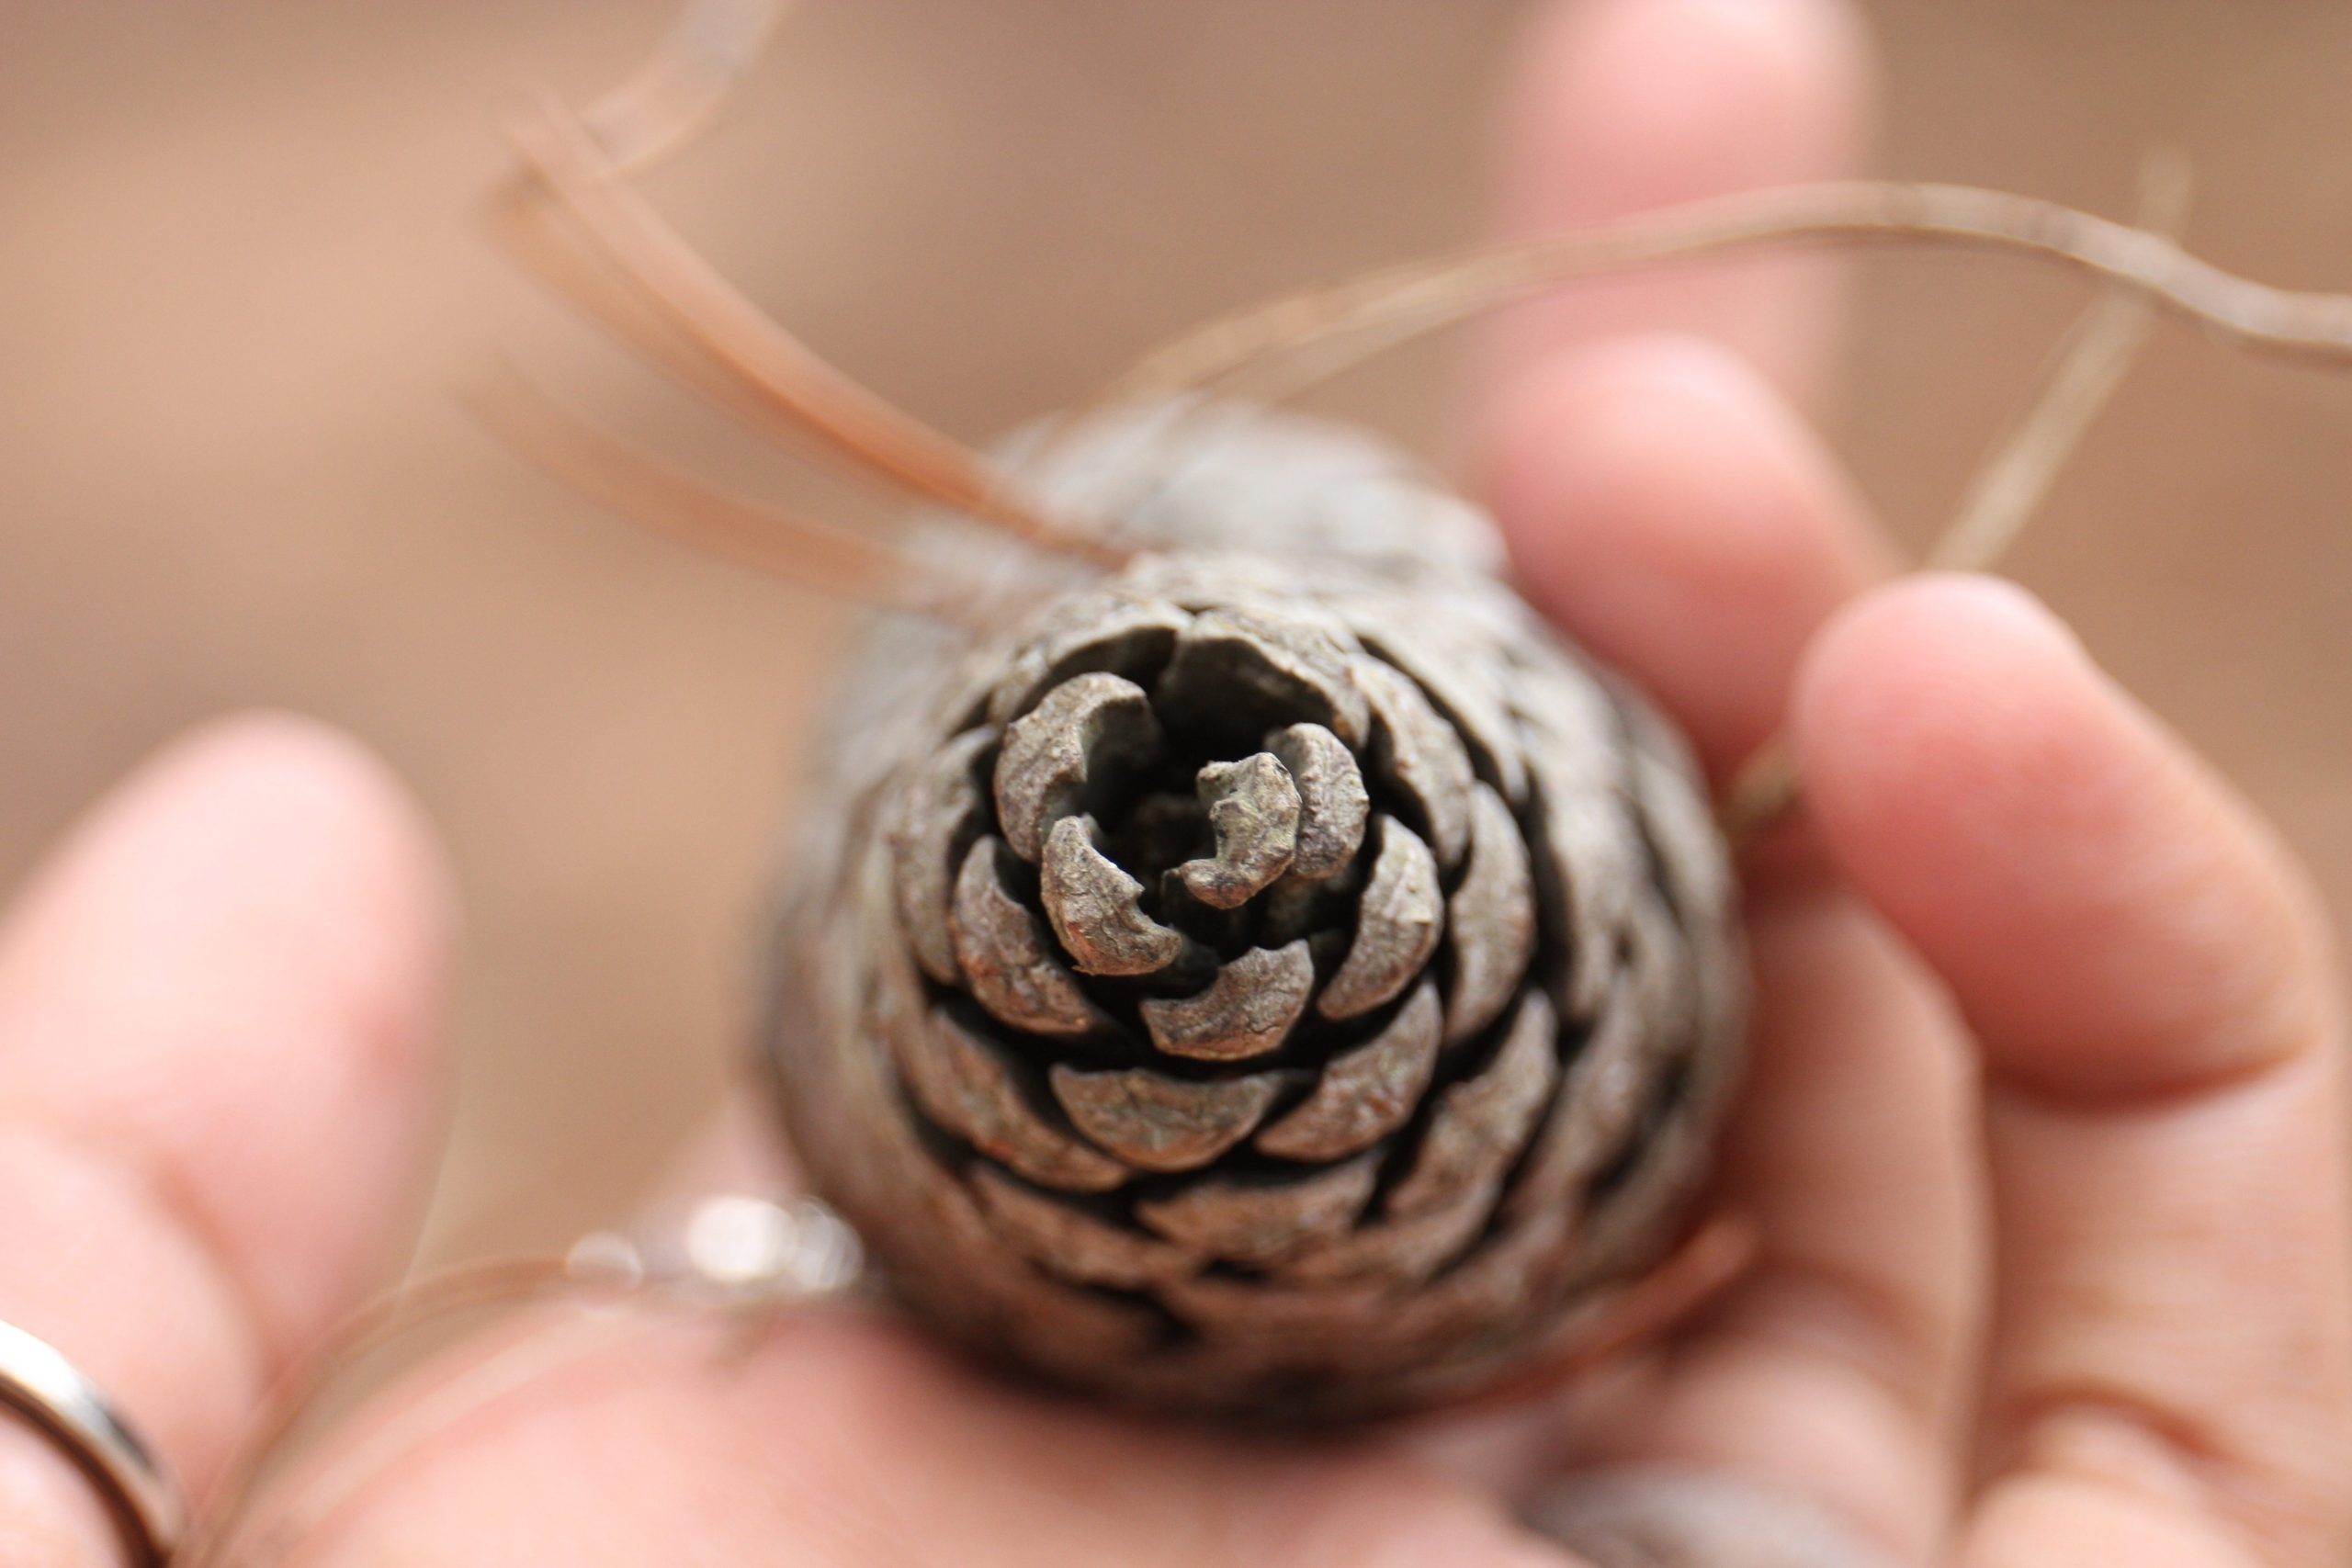 A pine plant in a hand